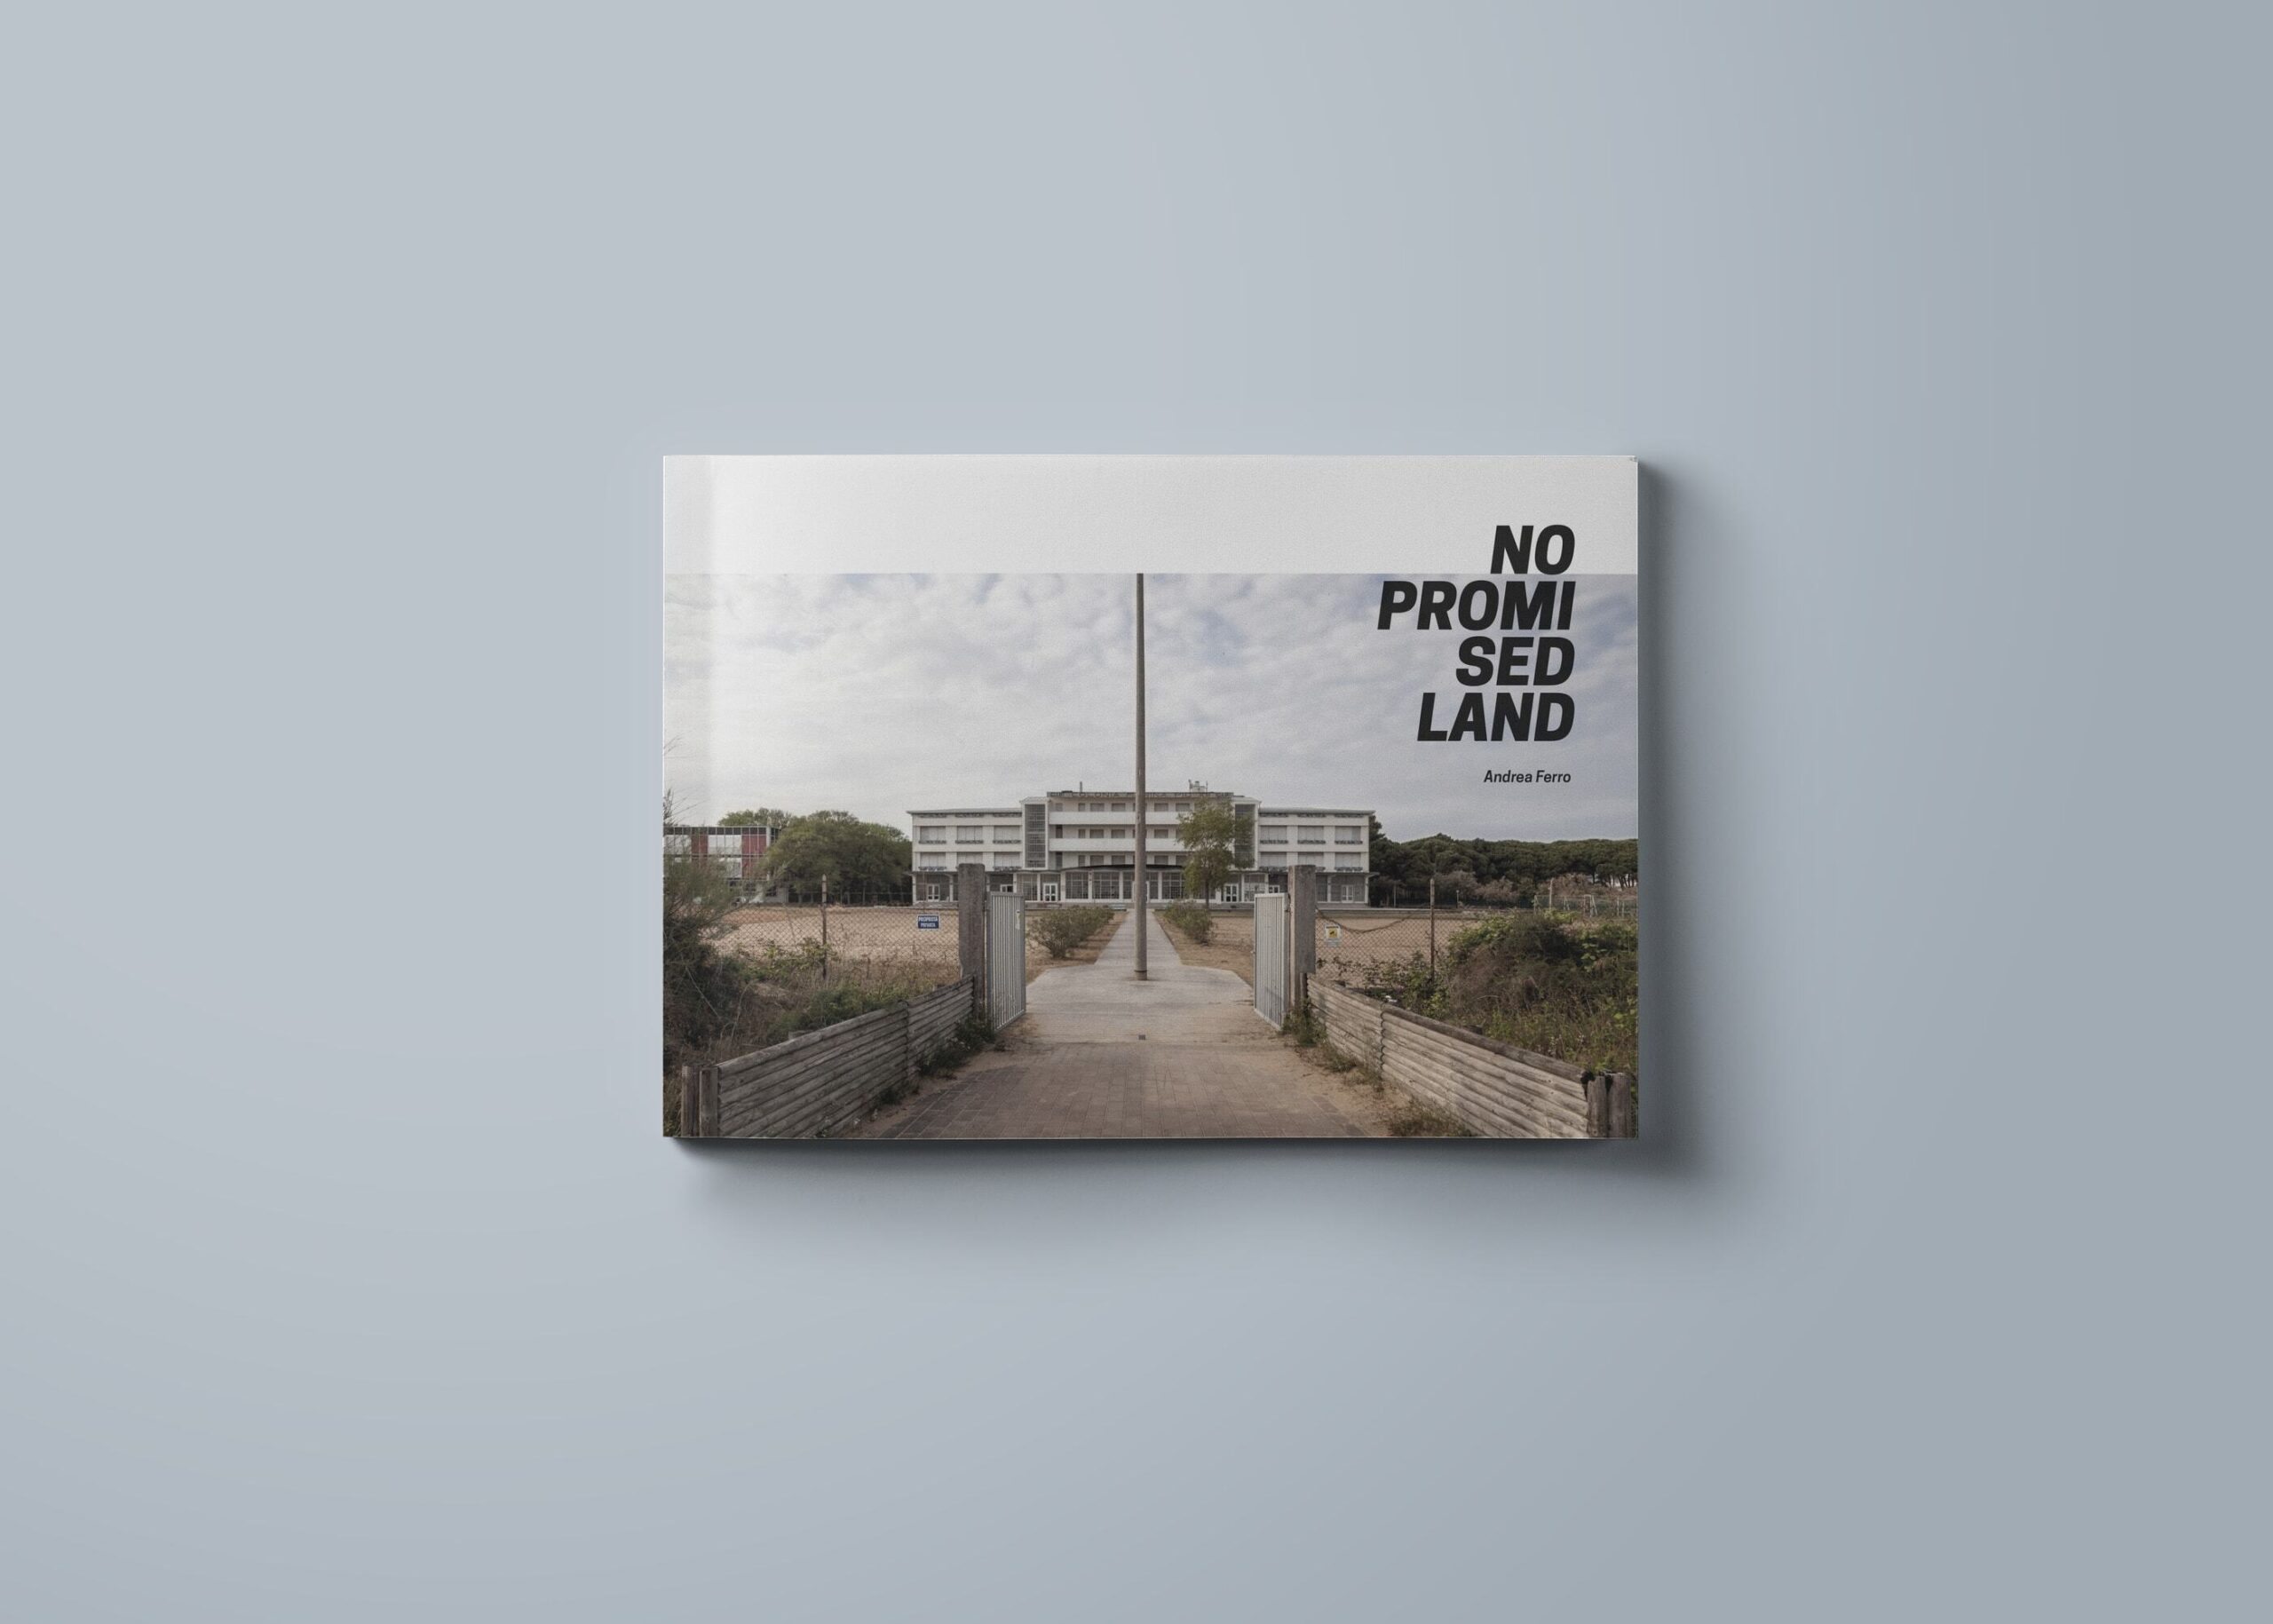 No promised land 10